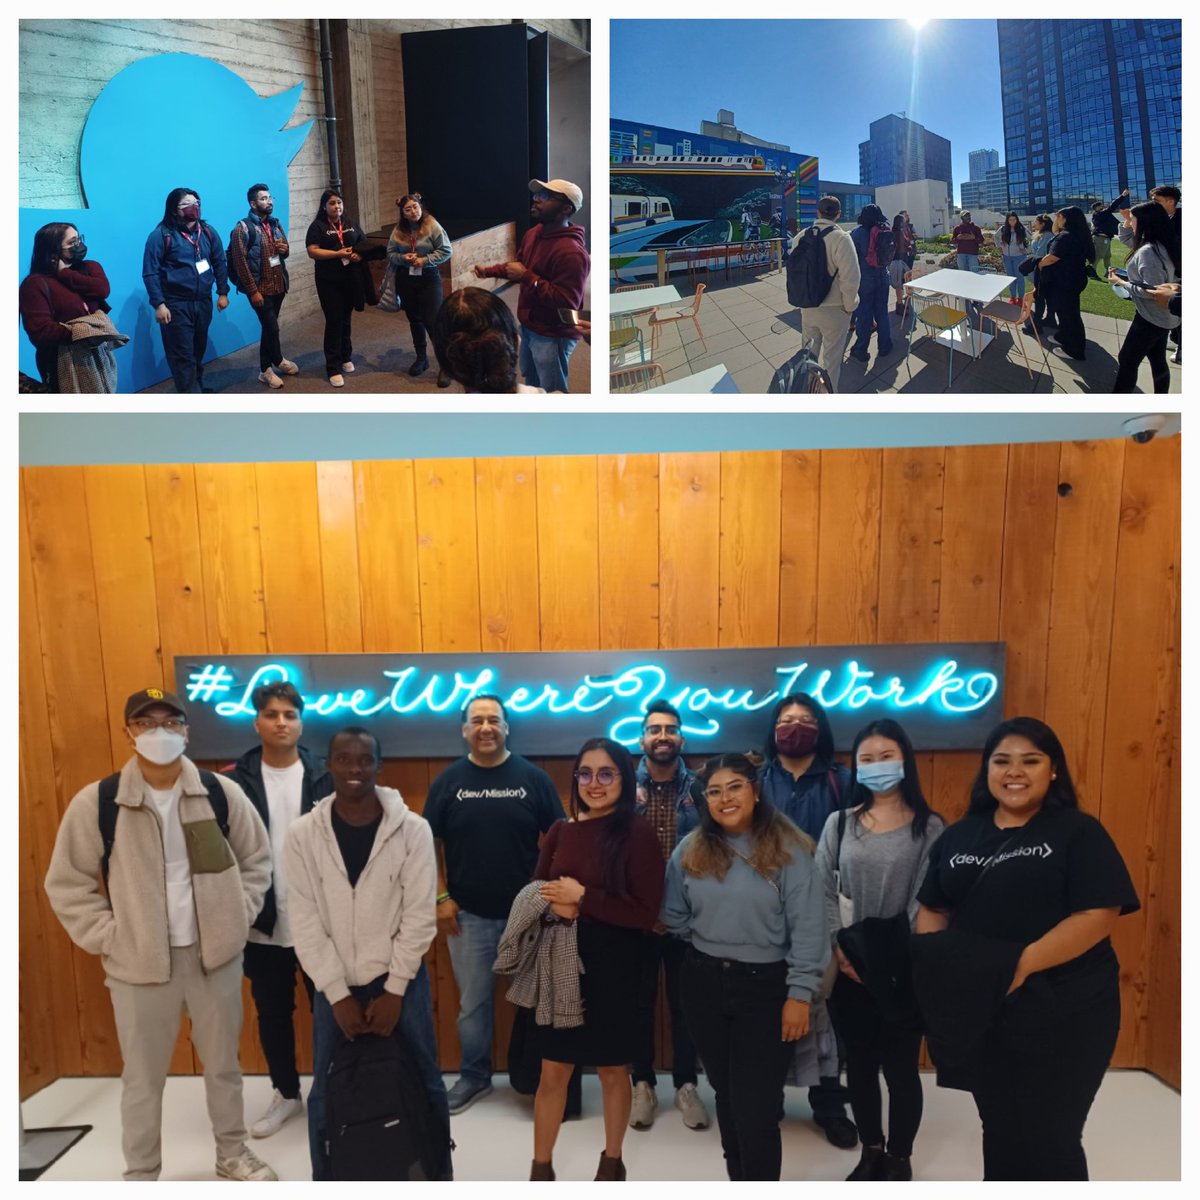 So excited to welcome the latest cohort from @devmissionorg to Twitter today on the last day of LHM! #TwitterForGood #palfrente #LoveWhereYouWork